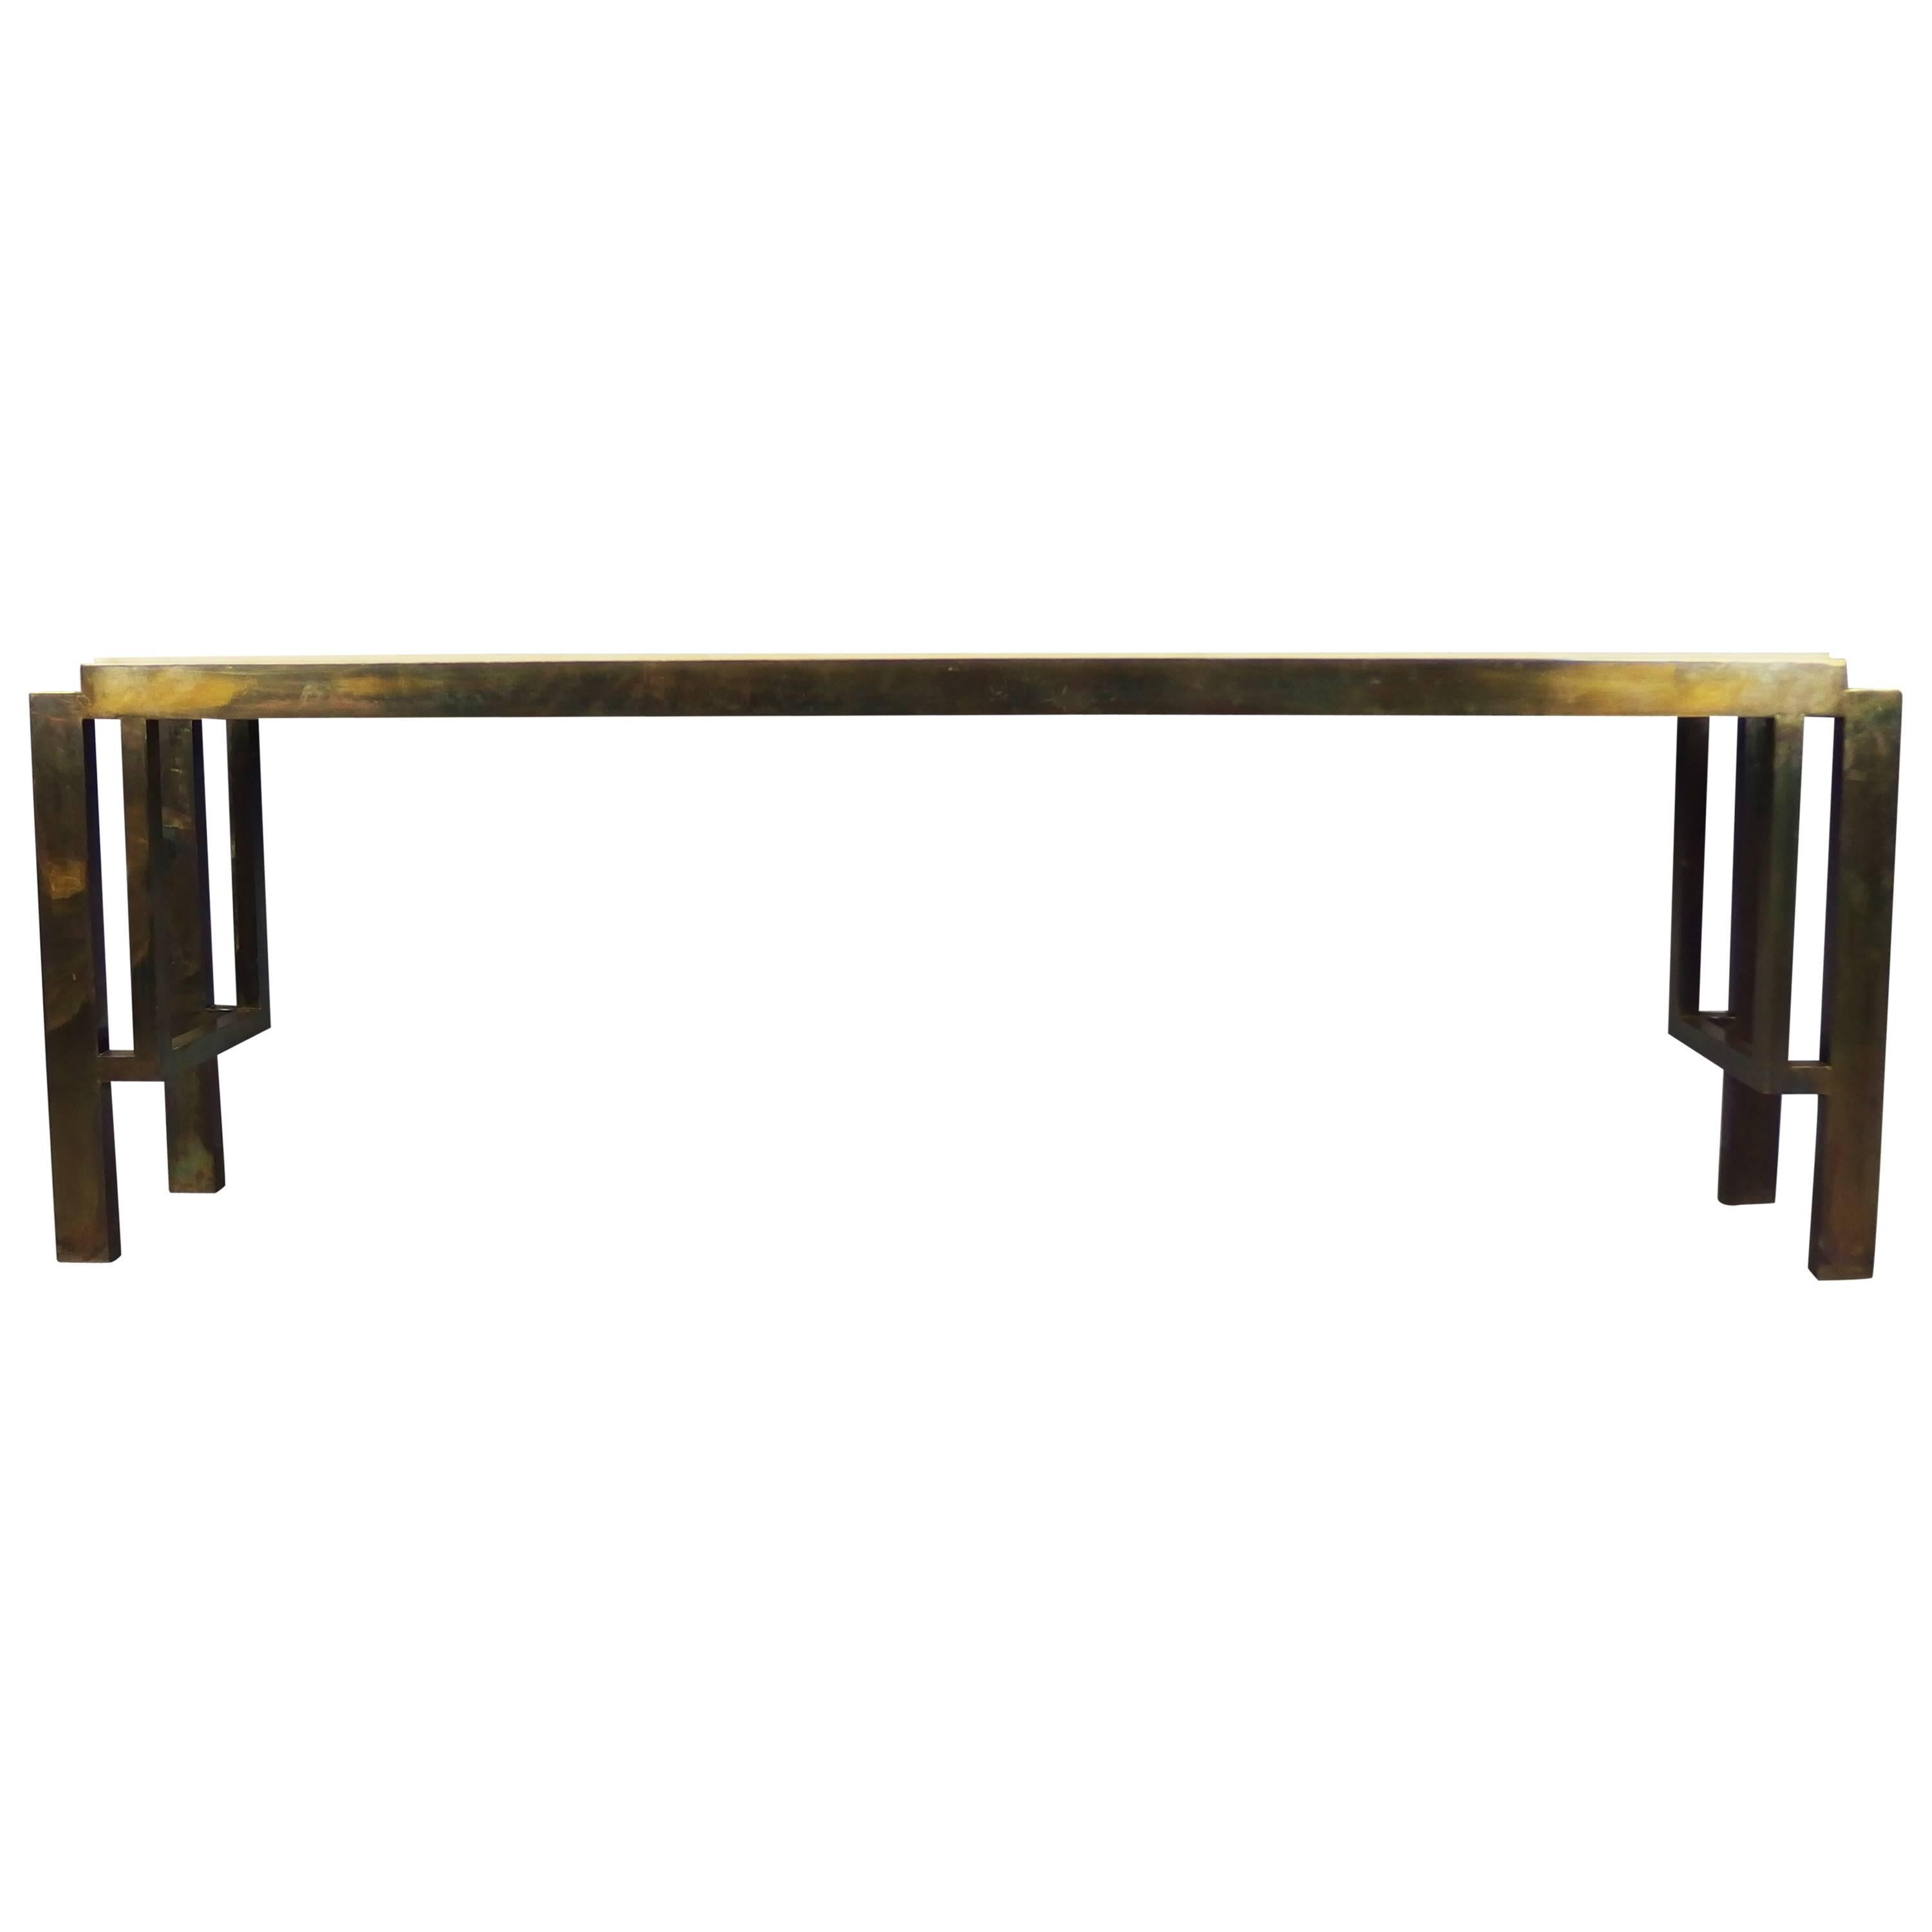 1970s Brass and Travertine Console Table by Nucci Valsecchi